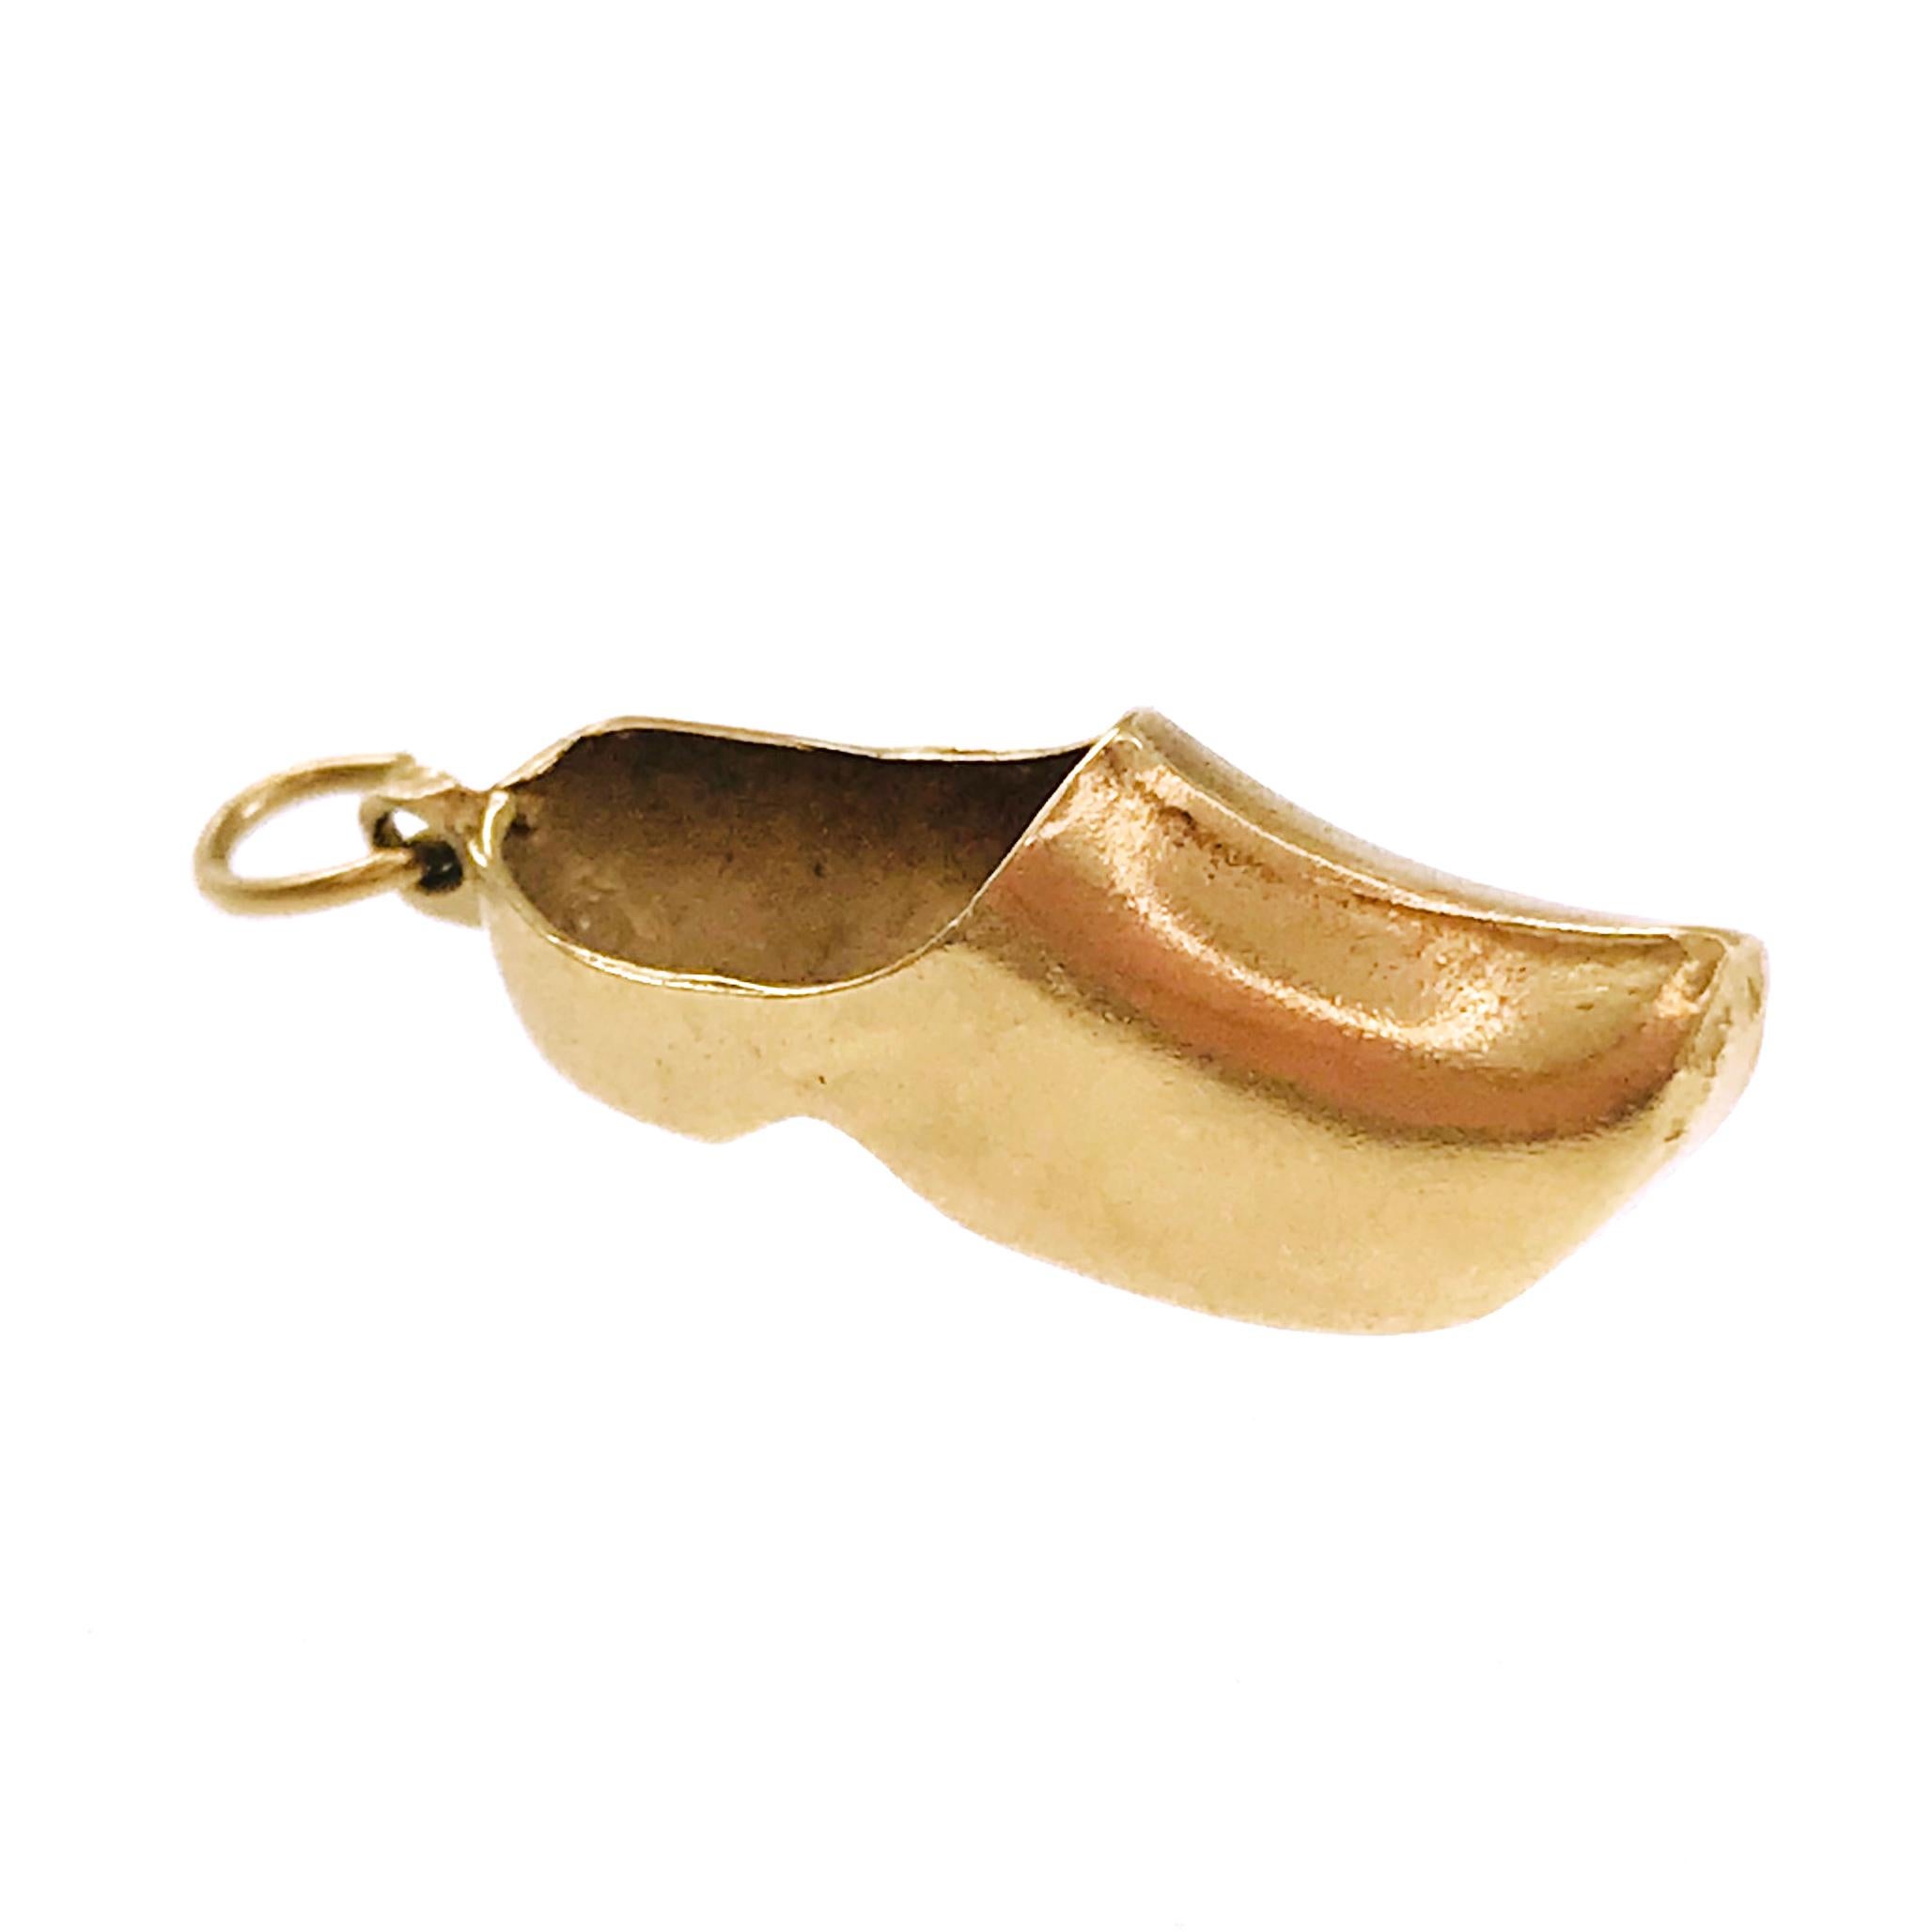 14 Karat Danish Clog Shoe Pendant. The pendant has an overall smooth finish and measures 9.6mm tall x 7.0mm wide x 26.8mm long. The total weight of this traditional vintage pendant/charm is 3.6 grams.